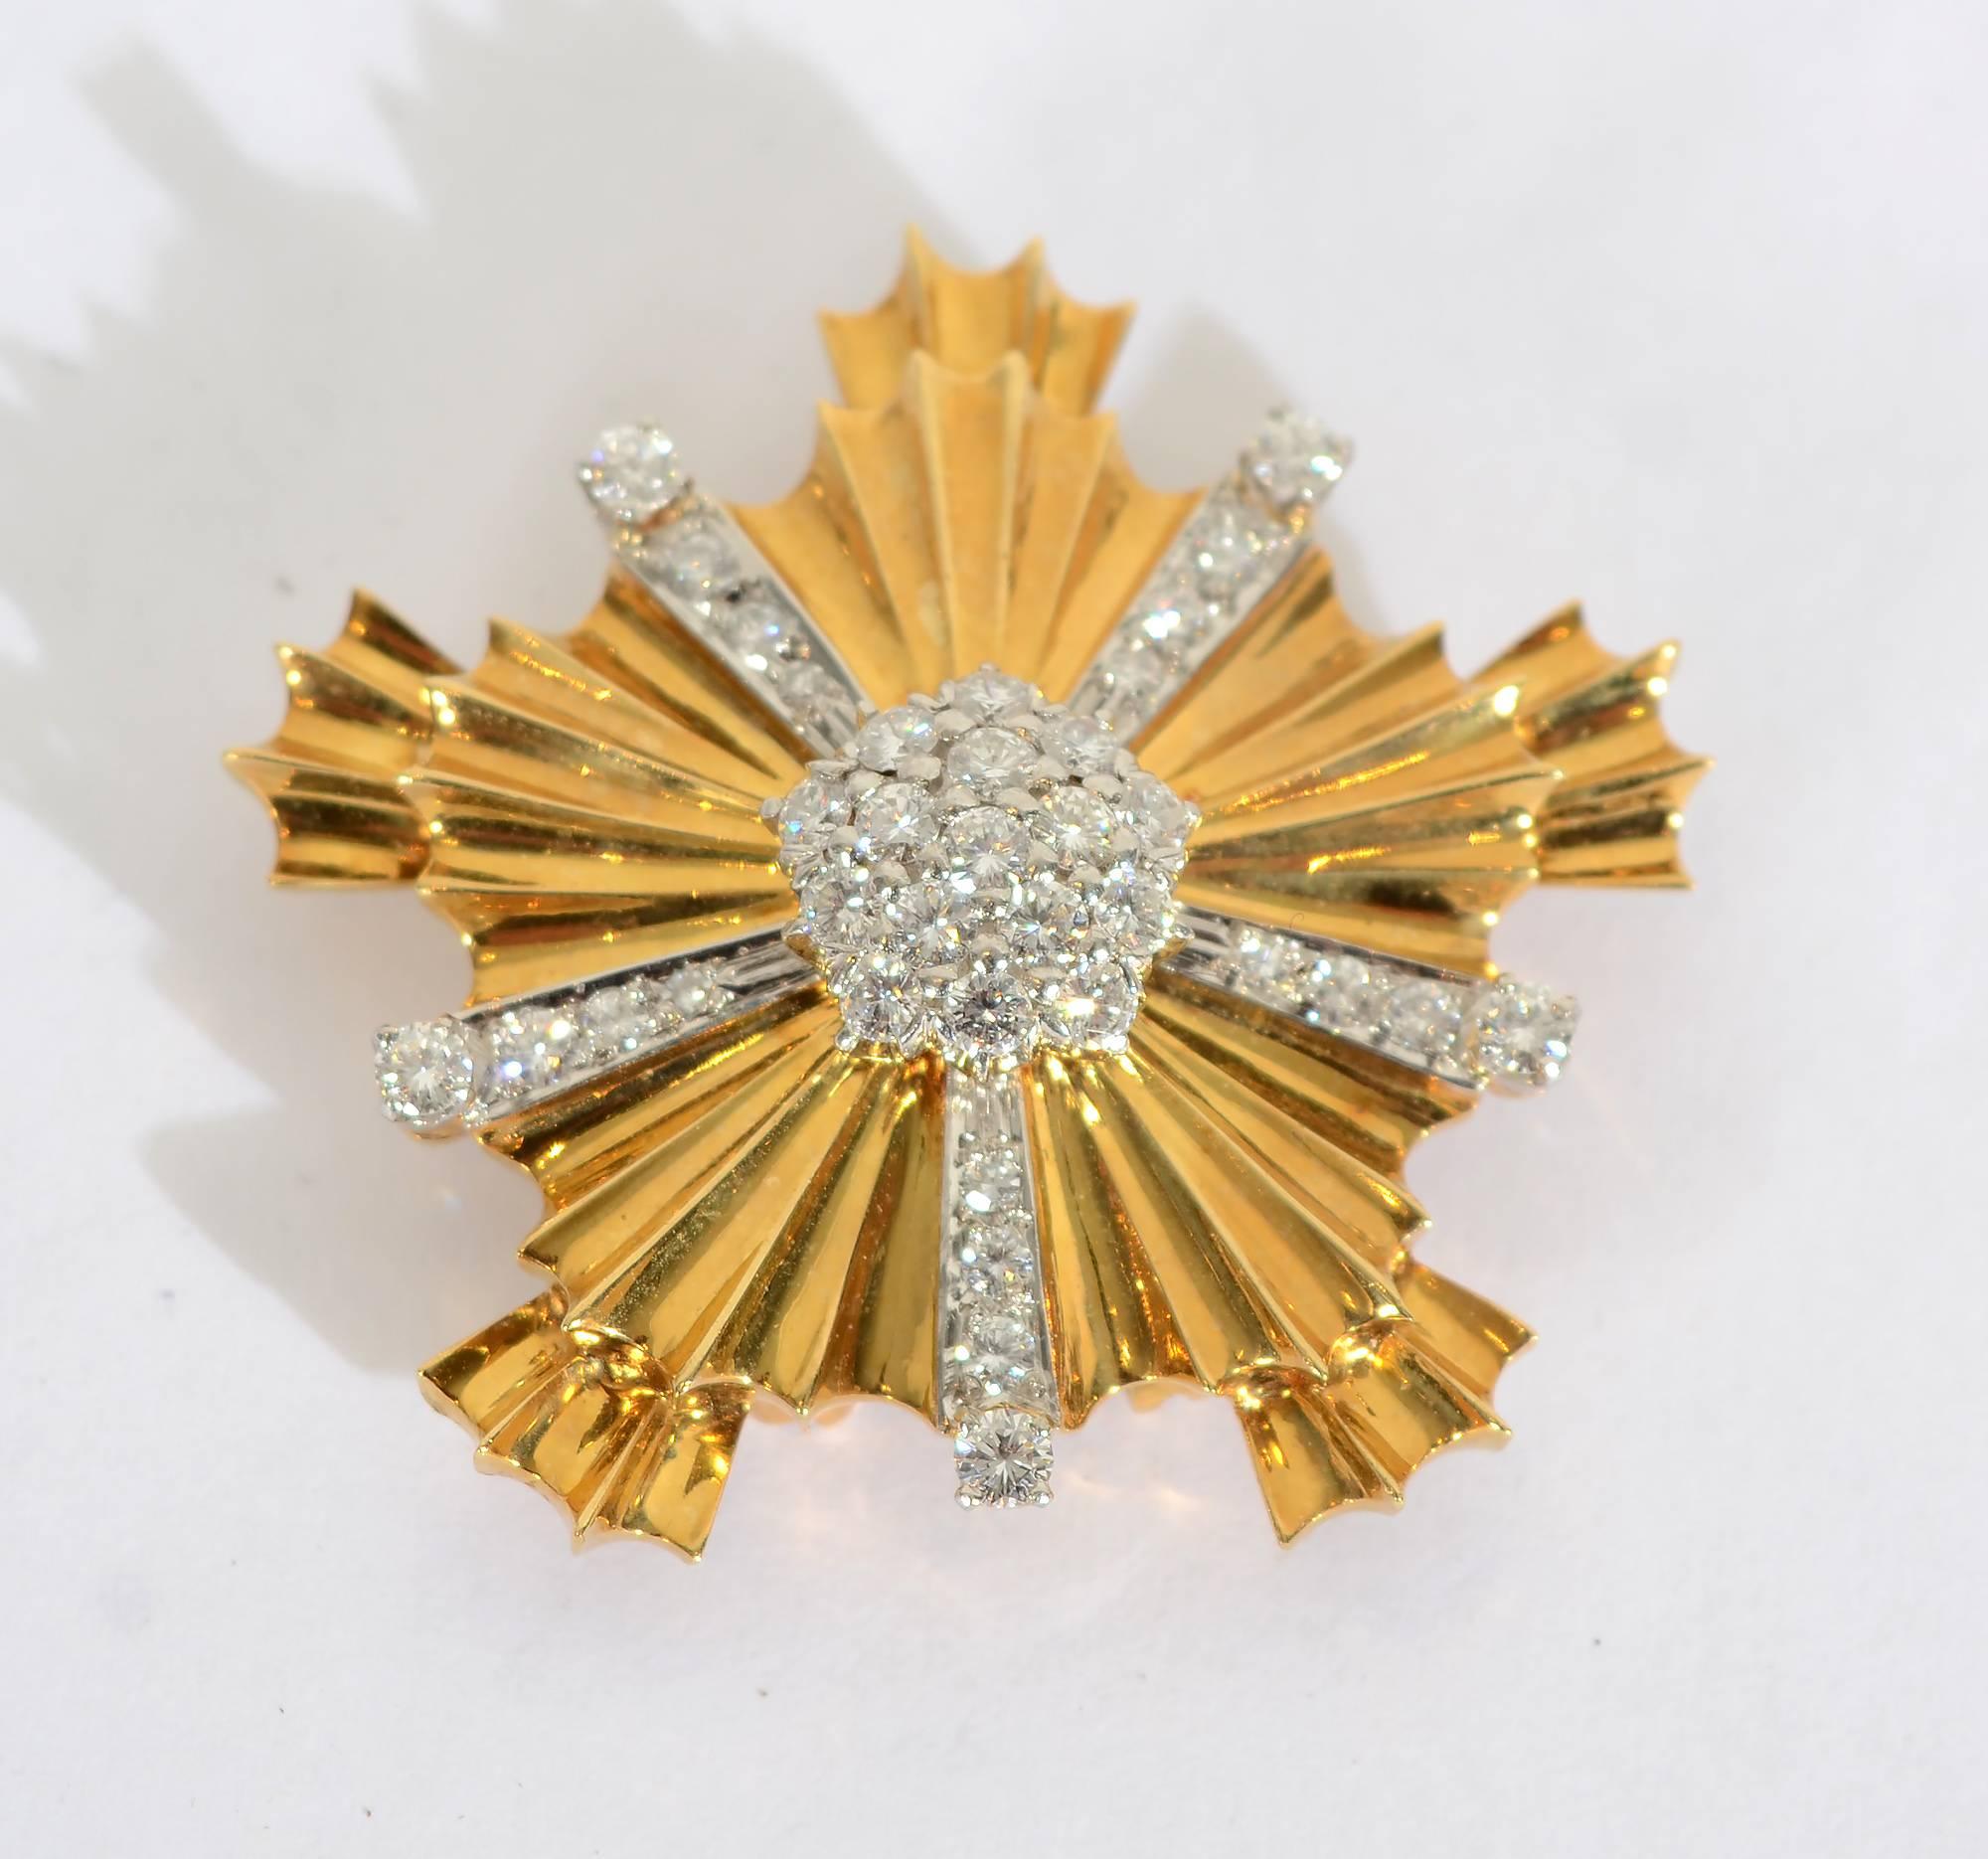 Tiffany 18 karat Retro brooch of a fluted five point starburst design. The central pave diamond cluster is dome shaped. Total diamond weight is approximately 1. 65 carats. Diamonds are set in platinum. They are vs quality, g color. The backing has